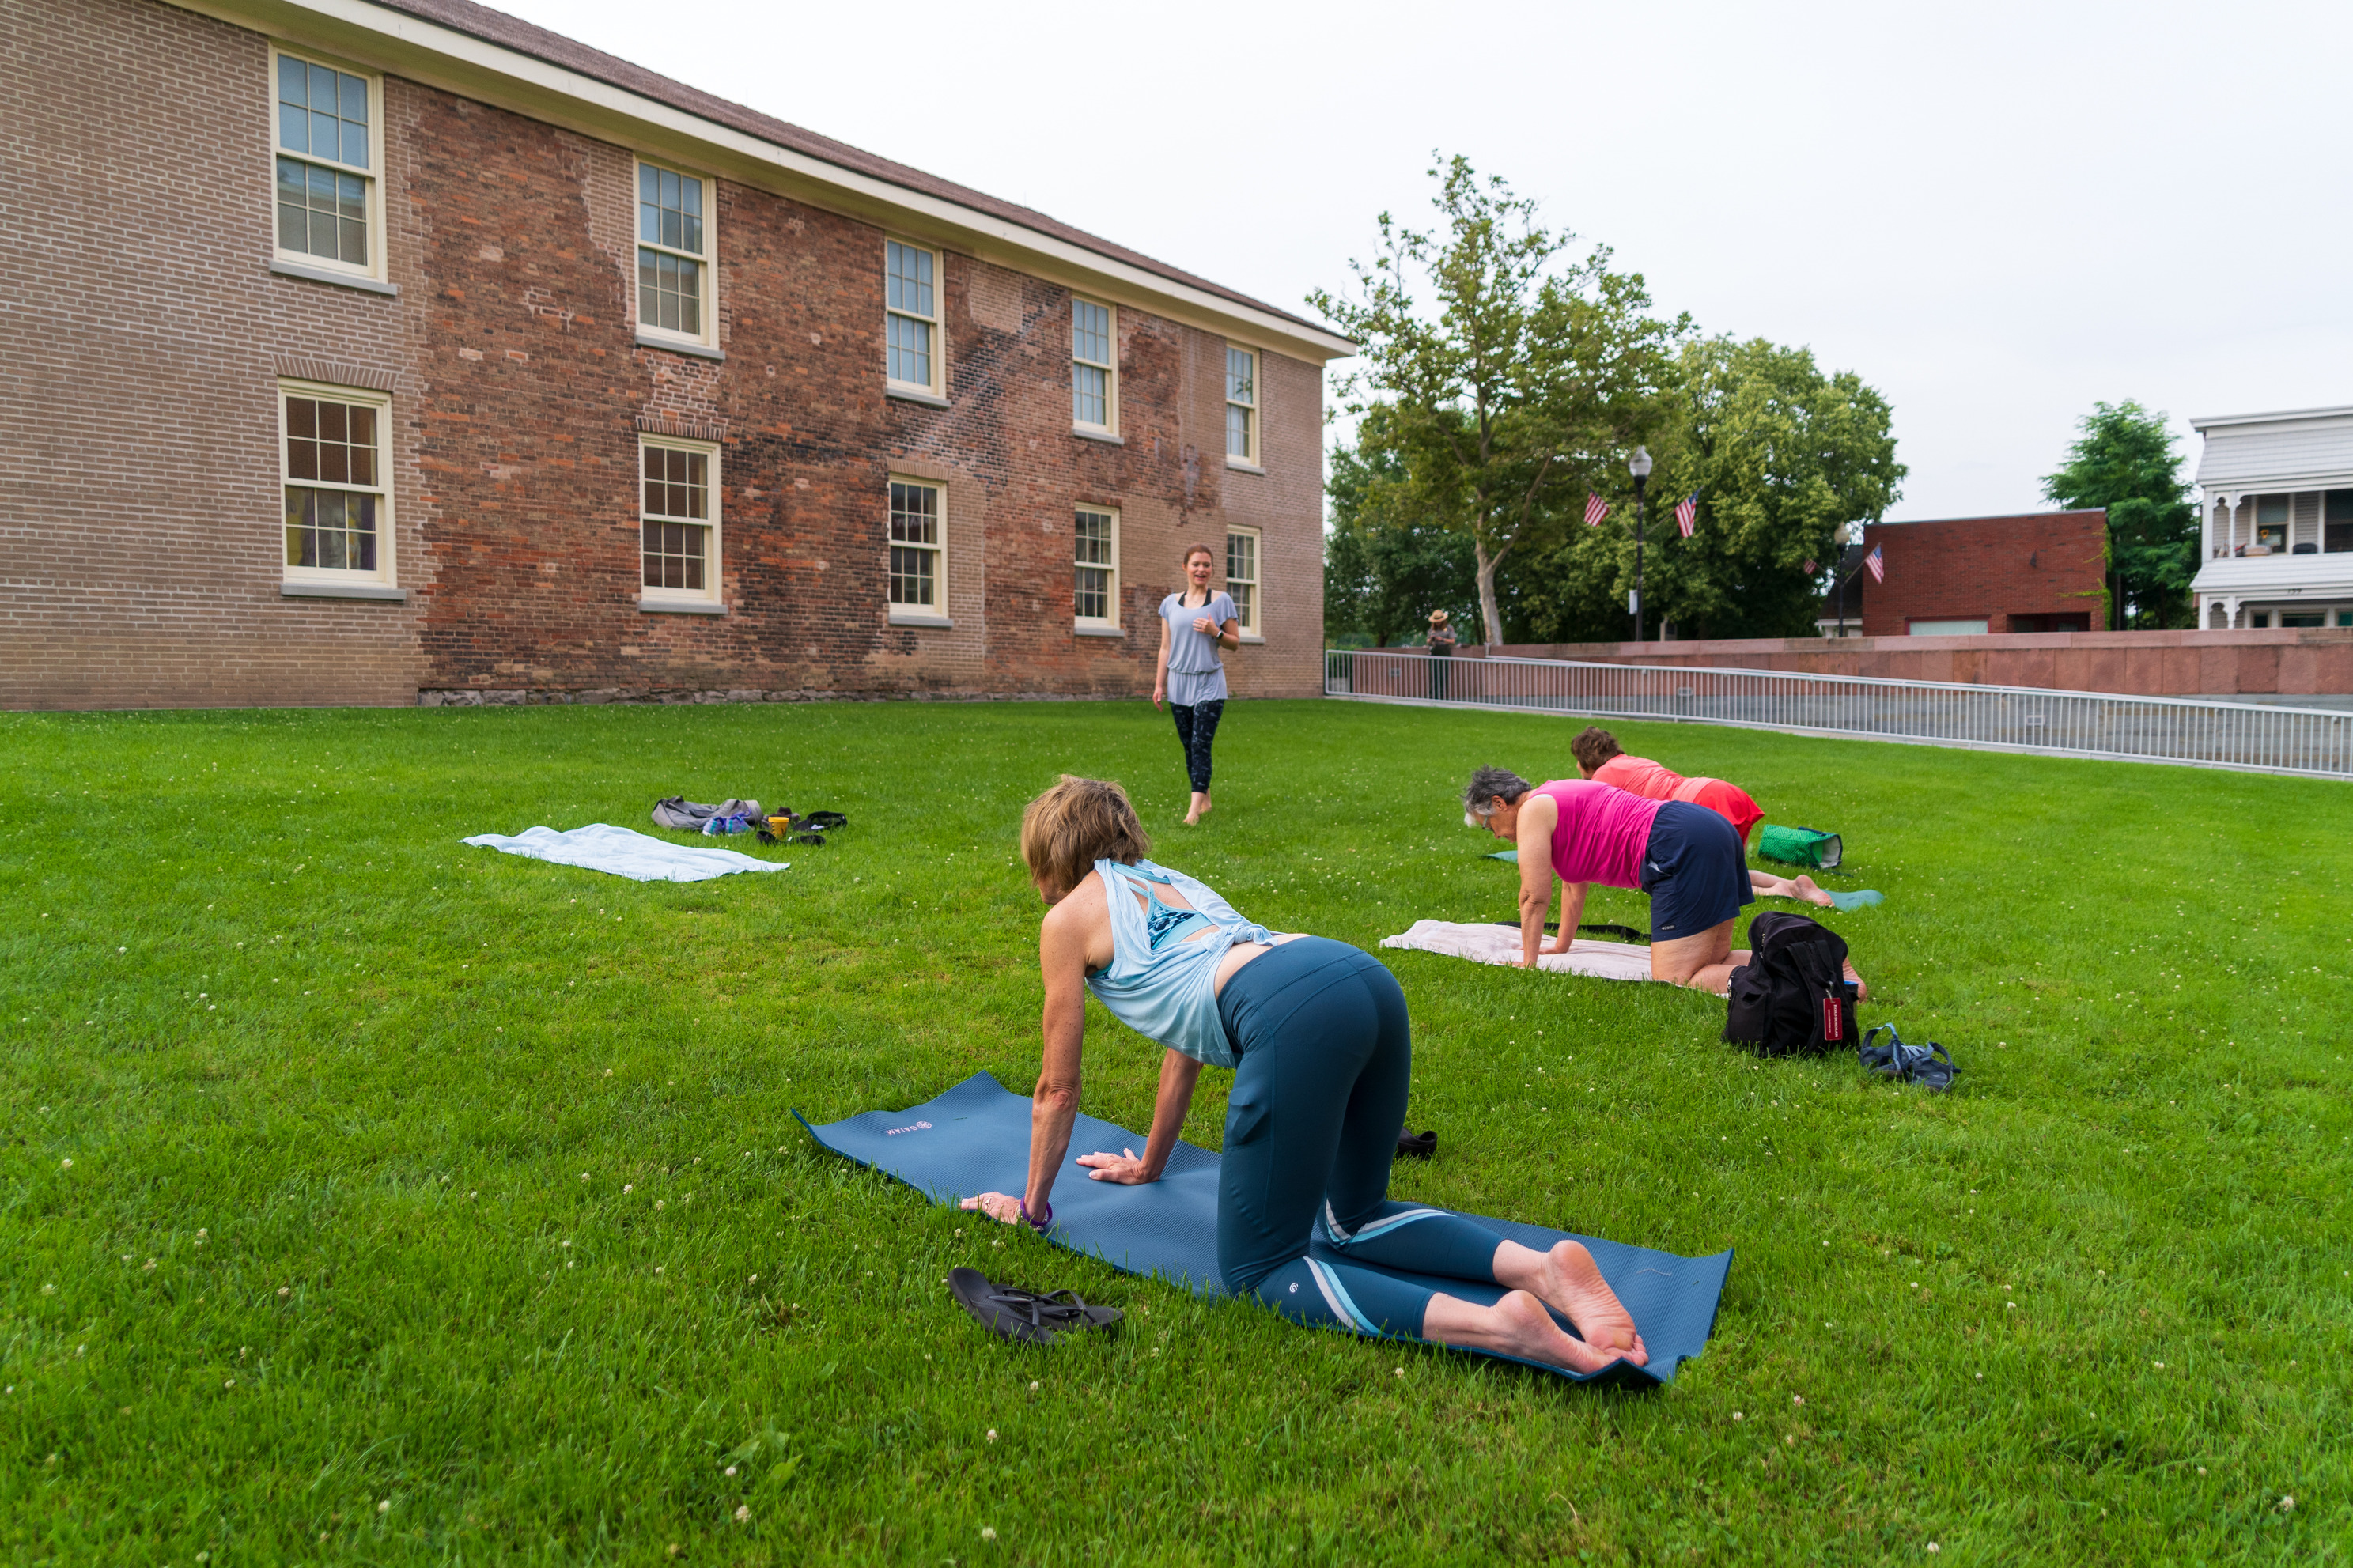 A yoga event on a lawn.